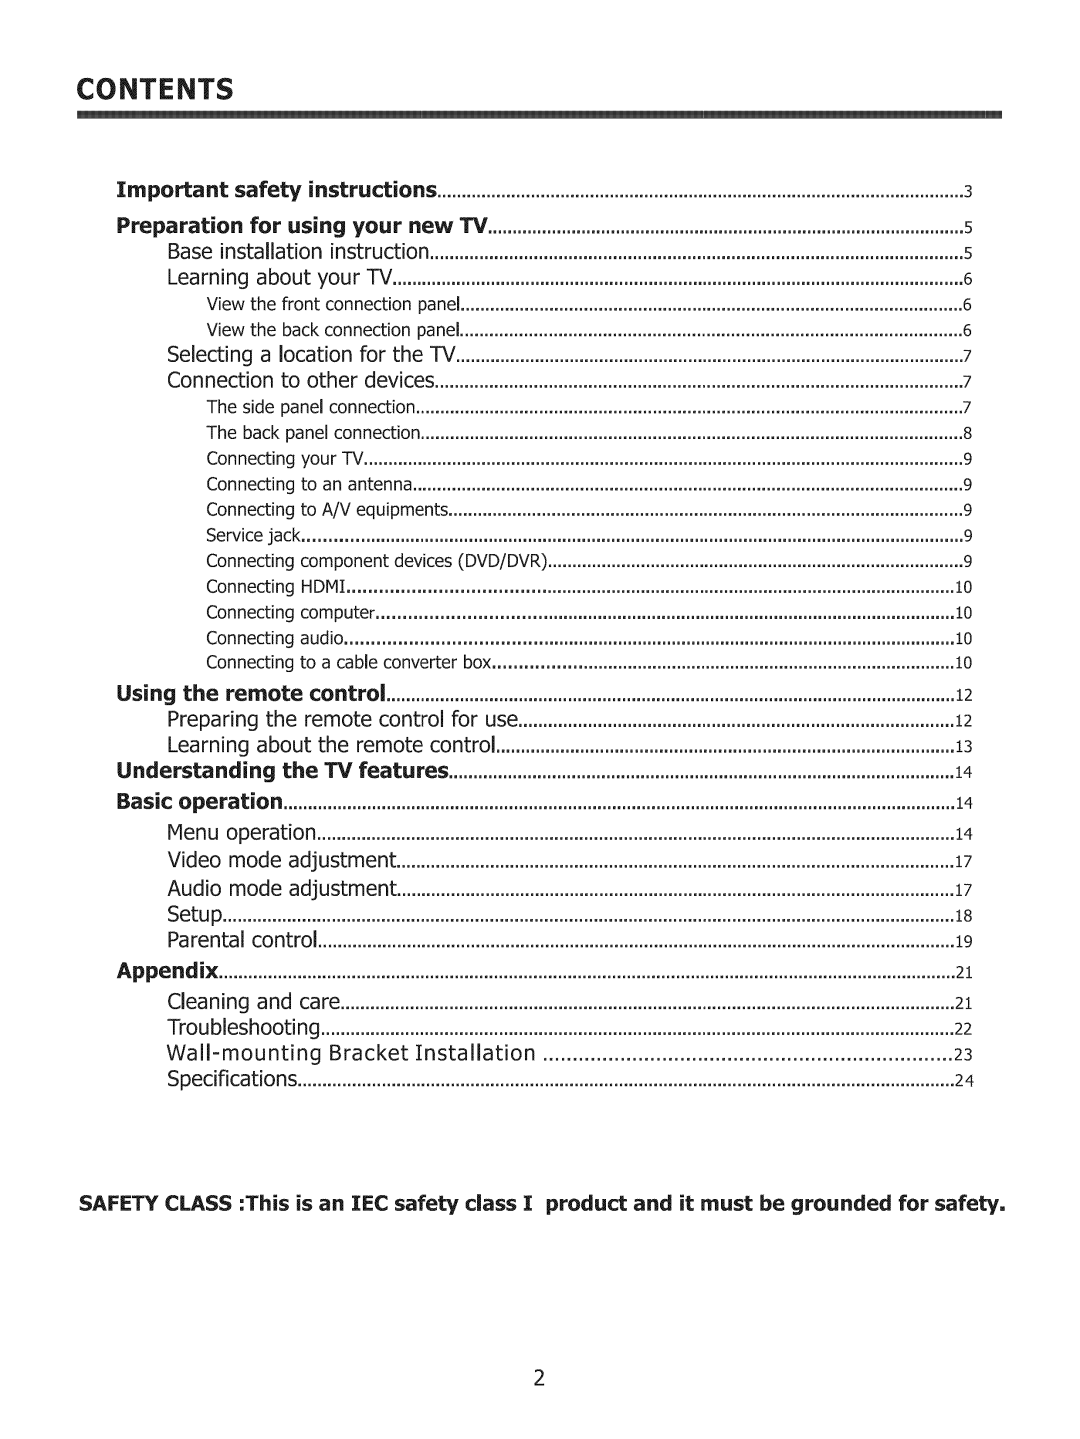 ProScan 37LC30S57 user manual Contents, safety, Preparation, using your, Learning about, Using the remote, Understanding 